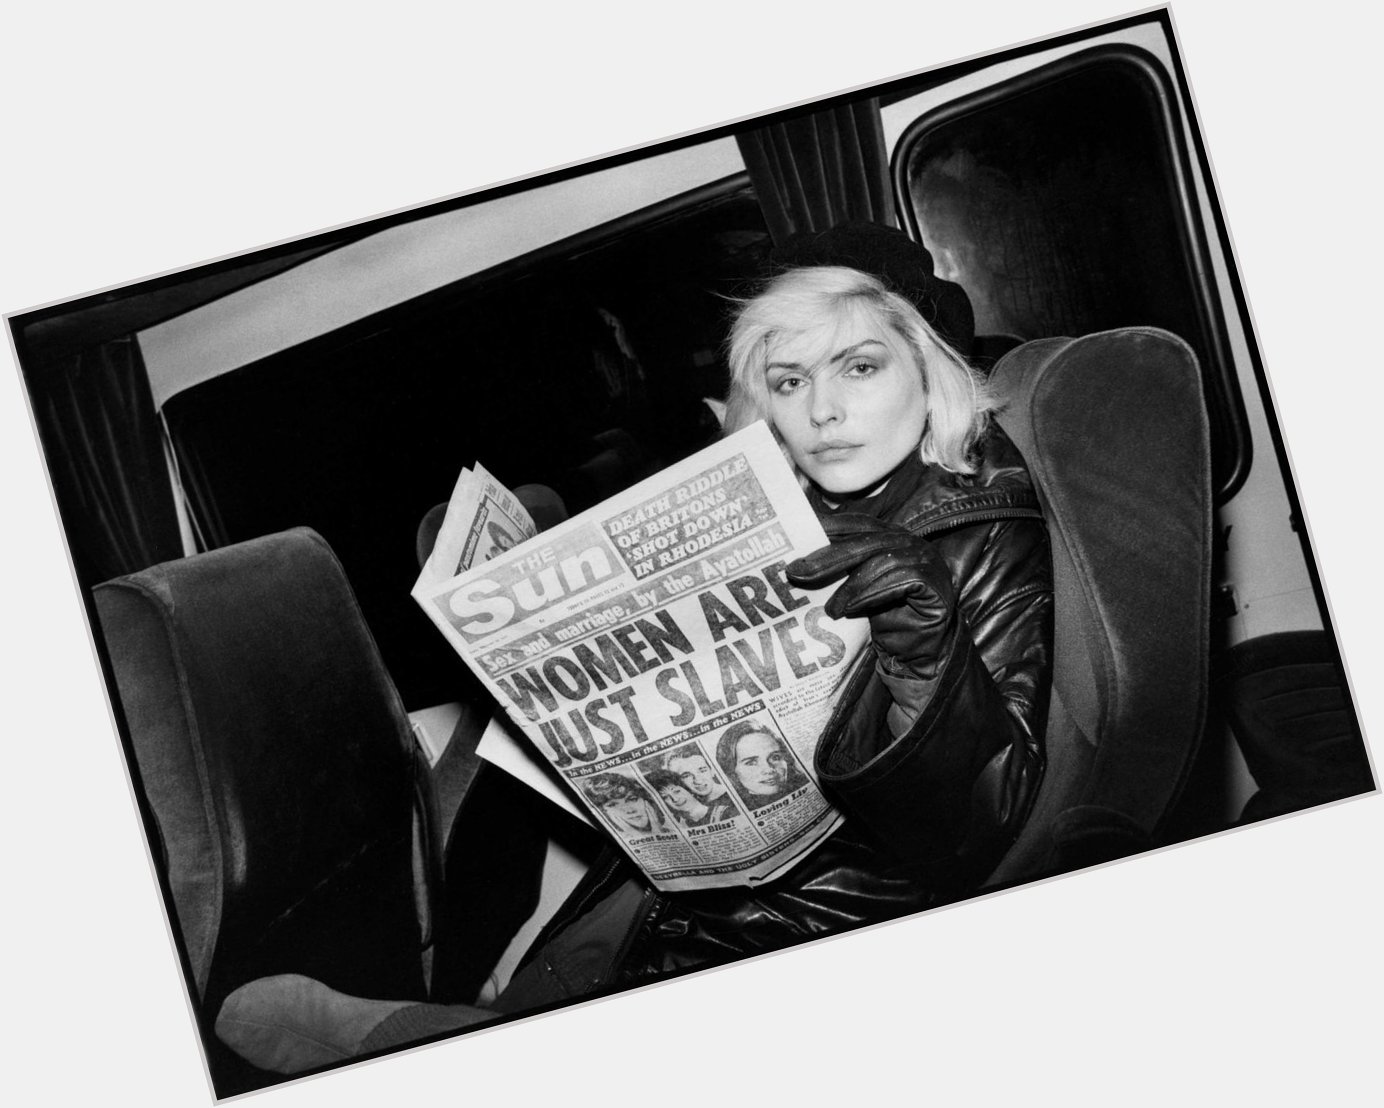 Happy birthday to the one and only, Debbie Harry! 